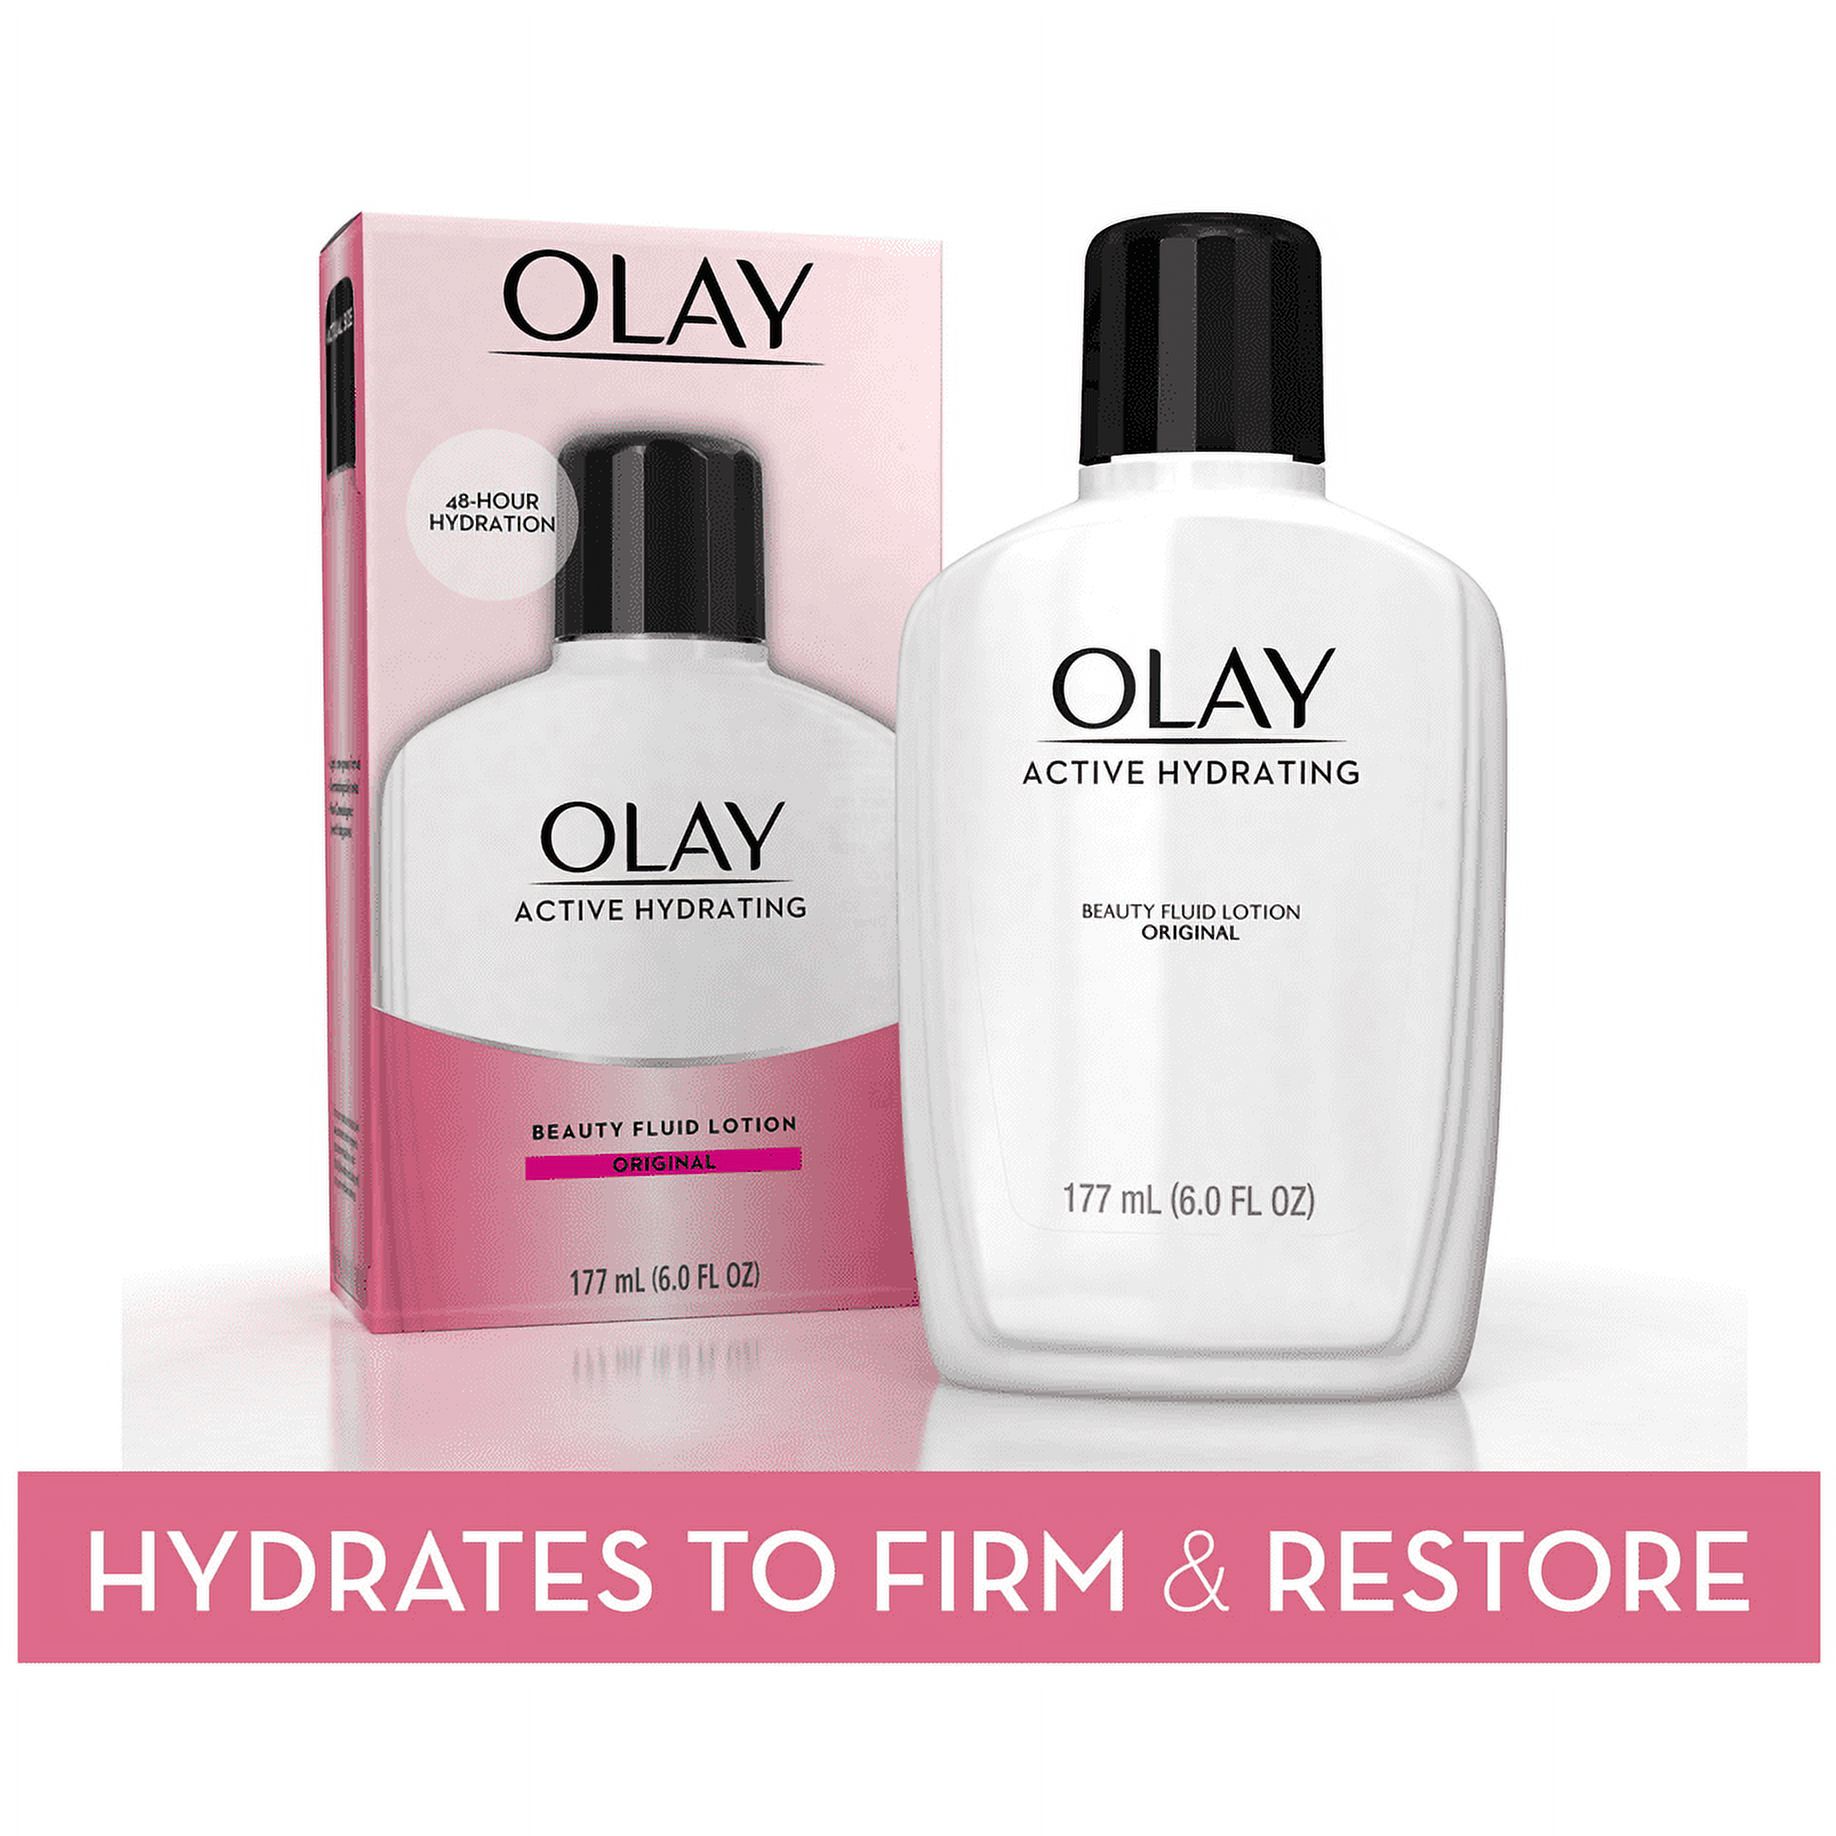 Olay Skincare Active Hydrating Beauty Facial Moisturizing Lotion, All Skin Types, 6 fl oz - image 1 of 8